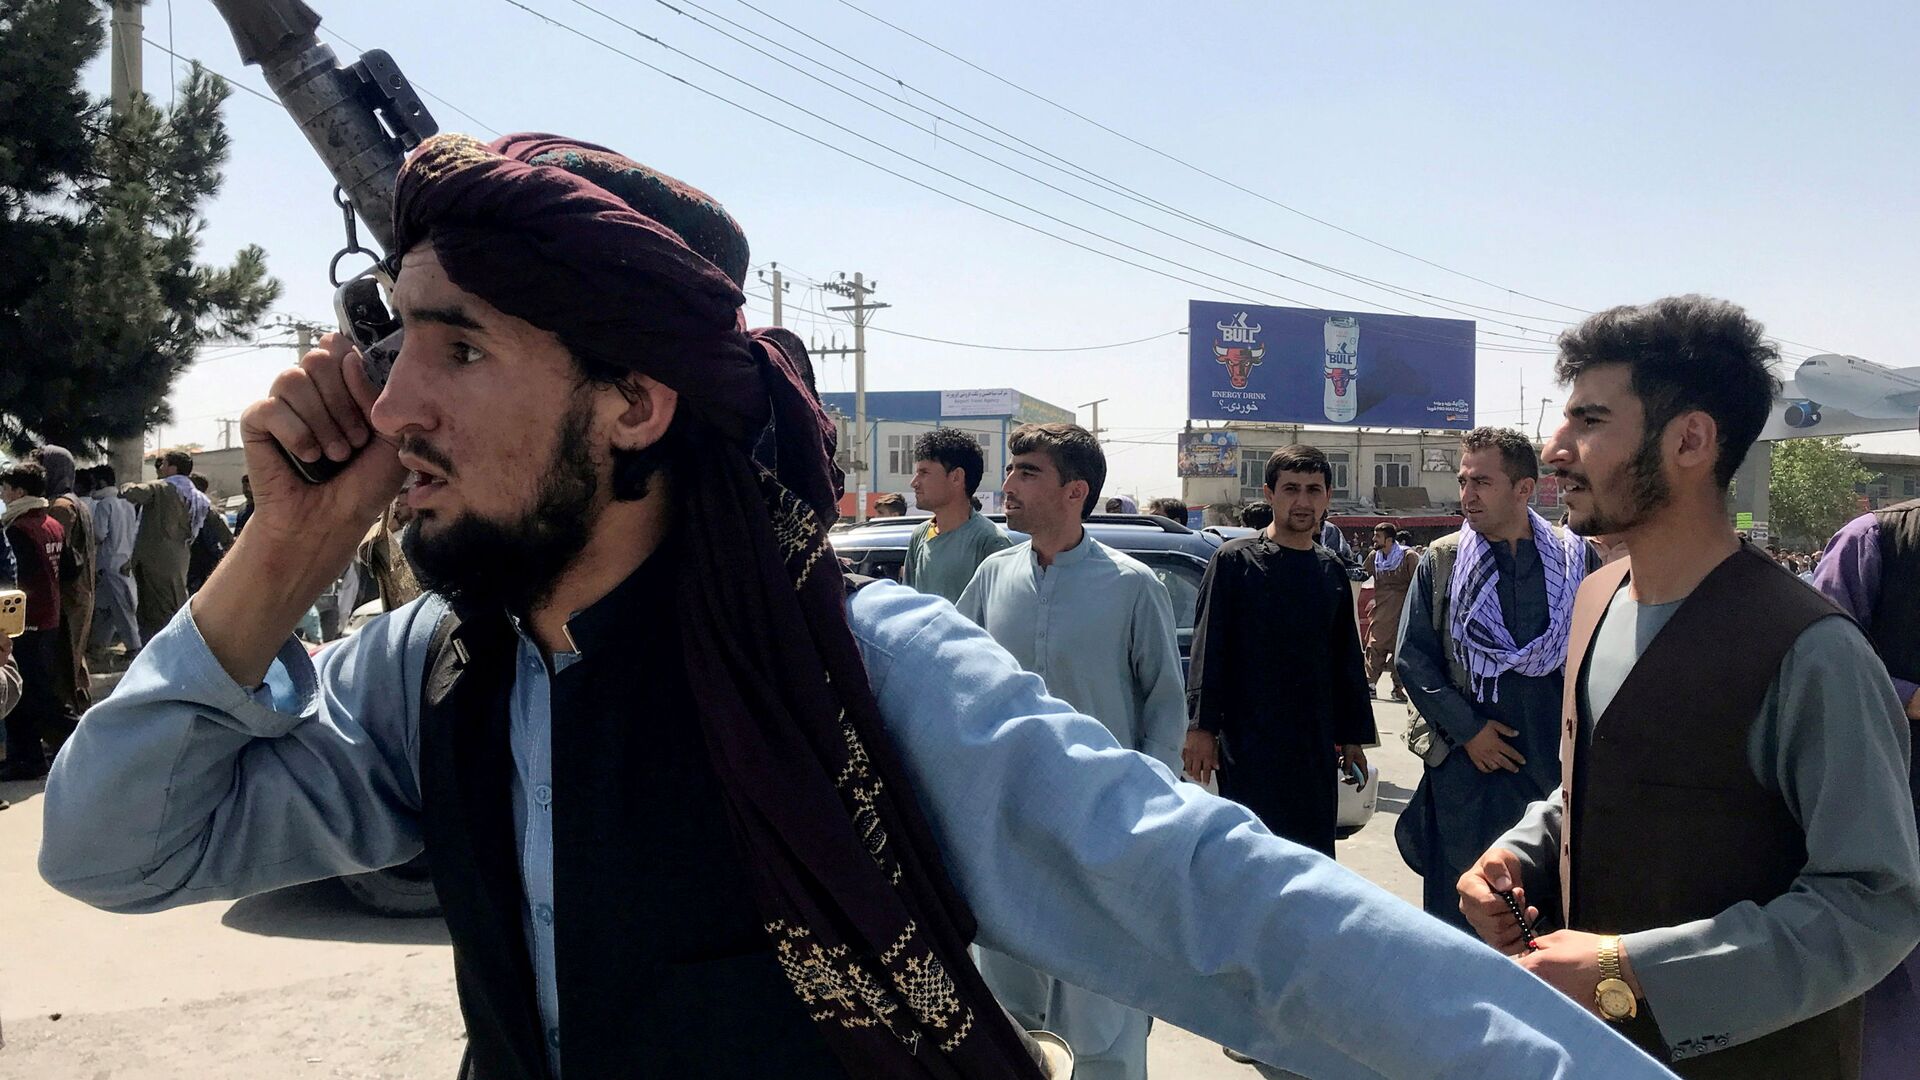 A member of the Taliban forces inspects the area outside Hamid Karzai International Airport in Kabul, Afghanistan, 16 August 2021 - Sputnik International, 1920, 19.08.2021